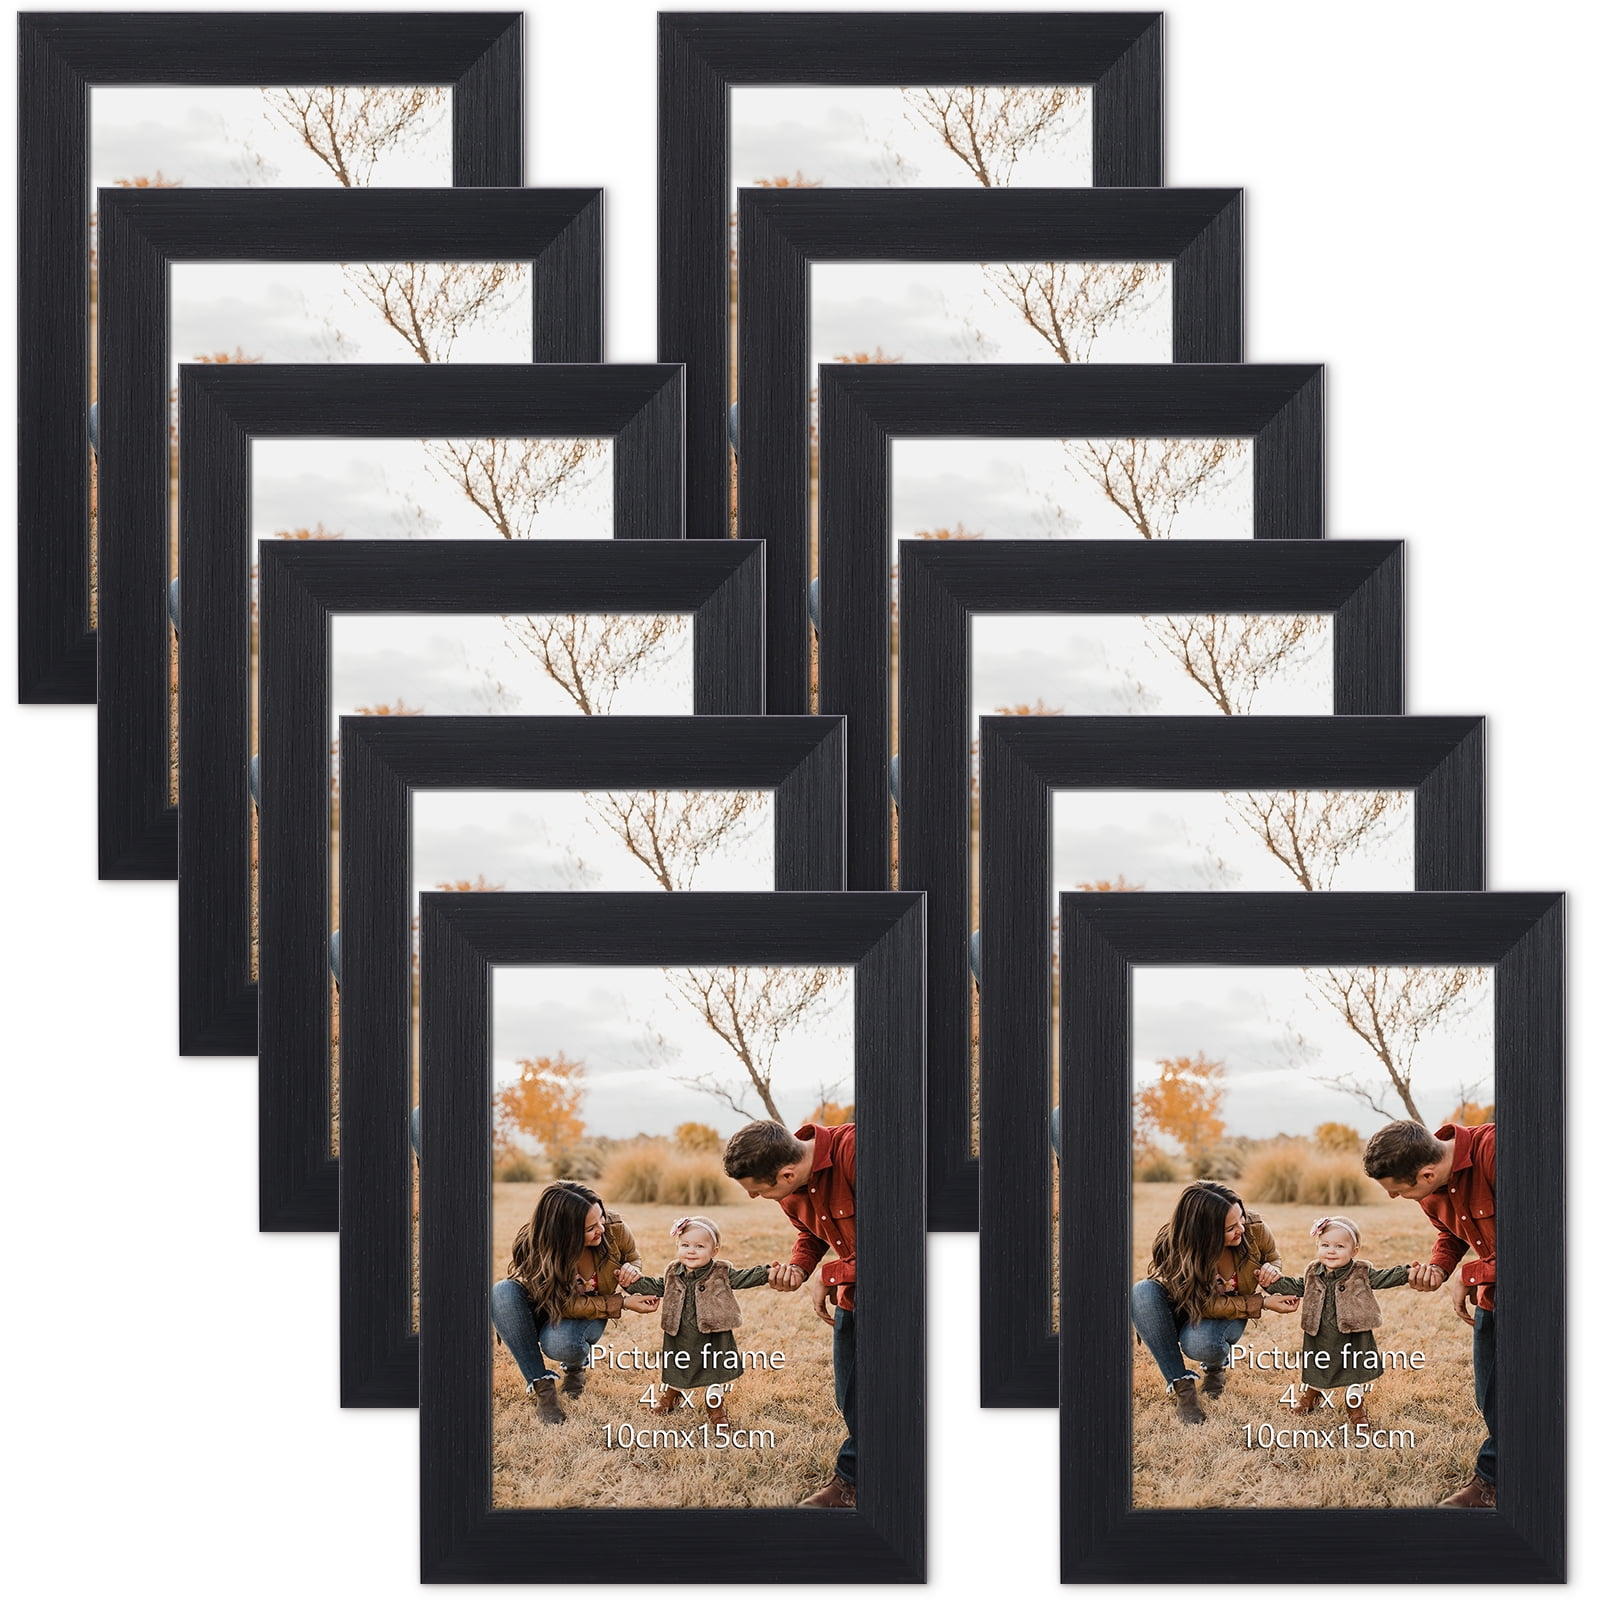 Giftgarden 4x6 Picture Frame Black Photo Frames Bulk for Wall or Tabletop,  Set of 12